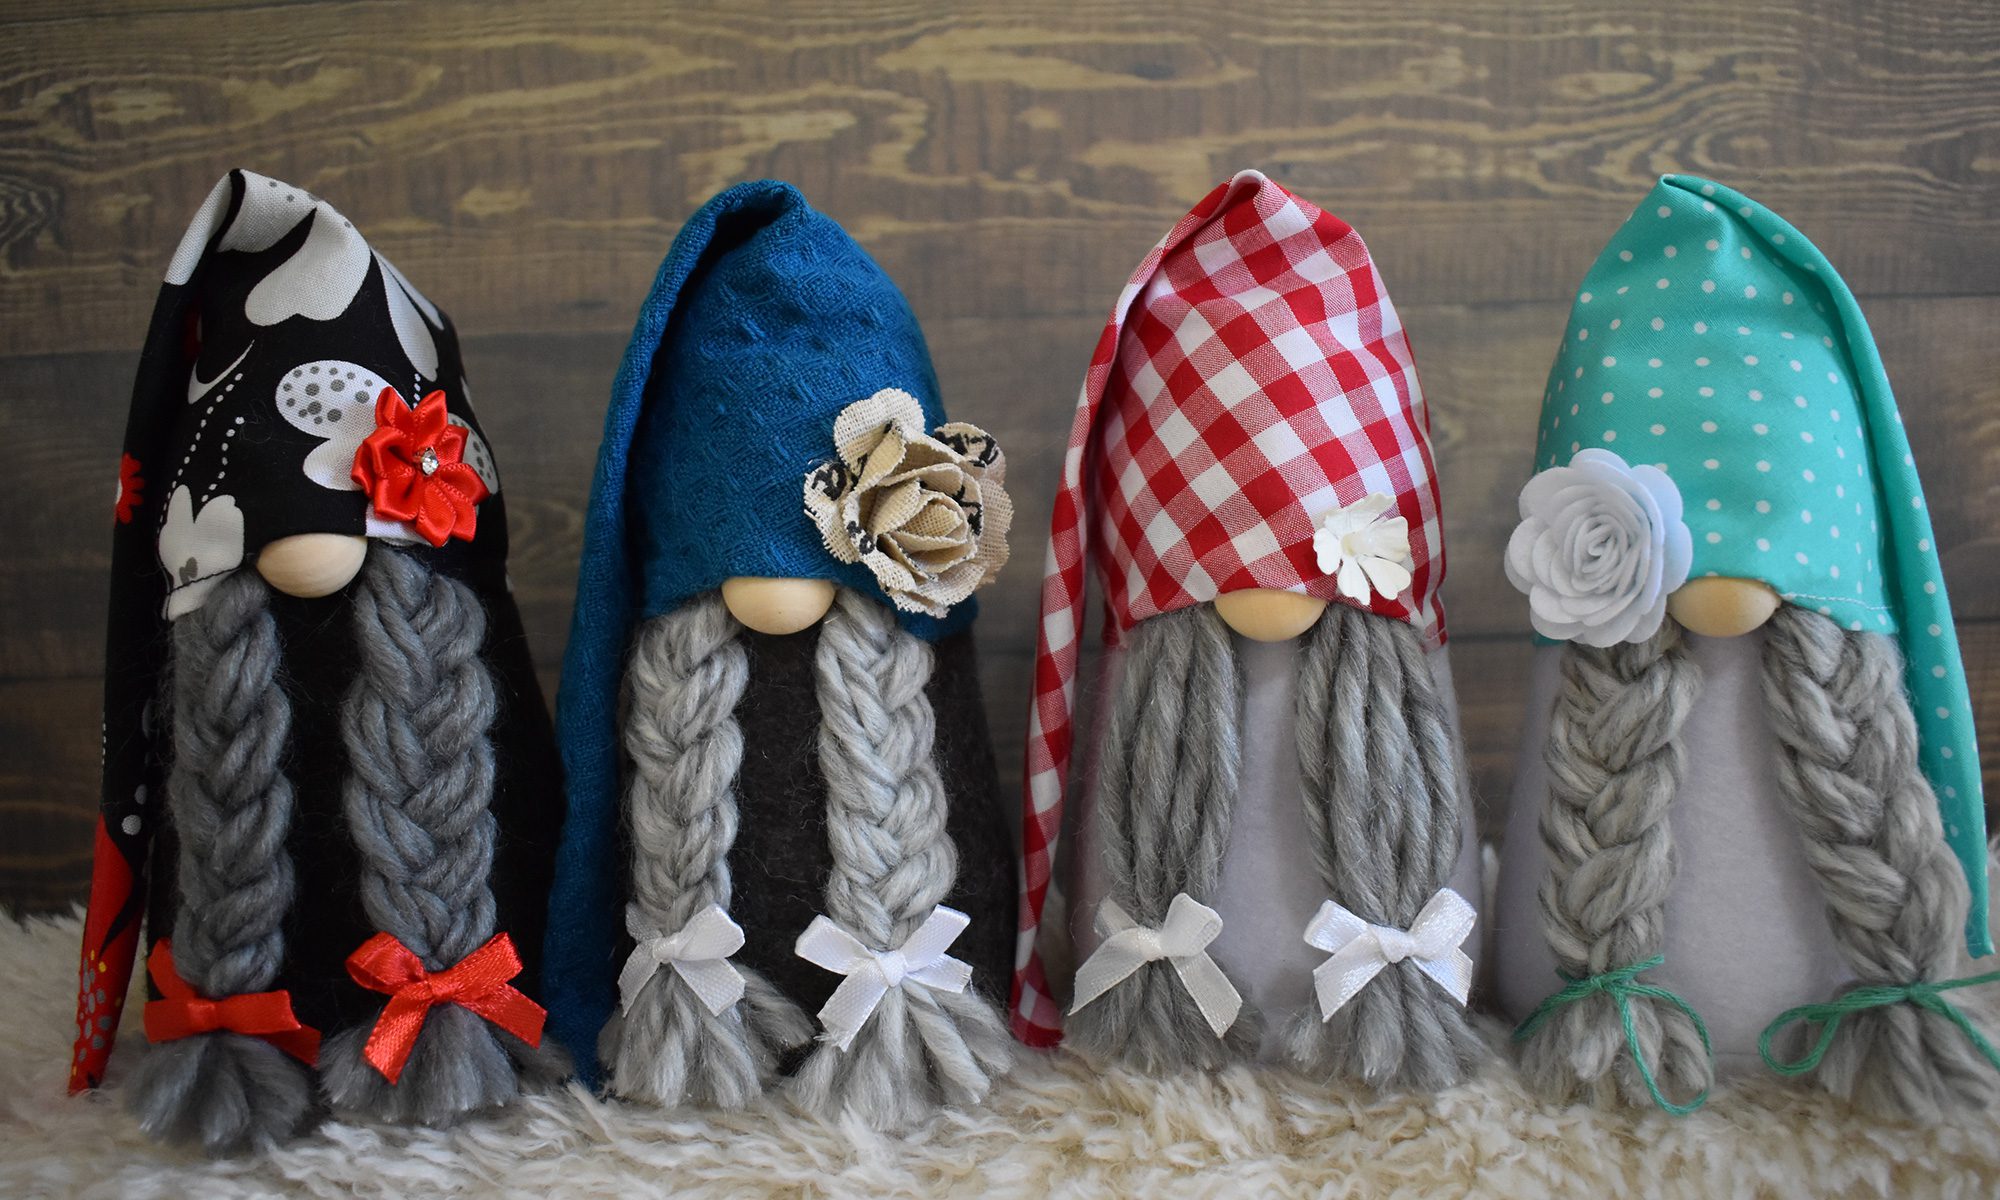 Handcrafted gnomes made to order